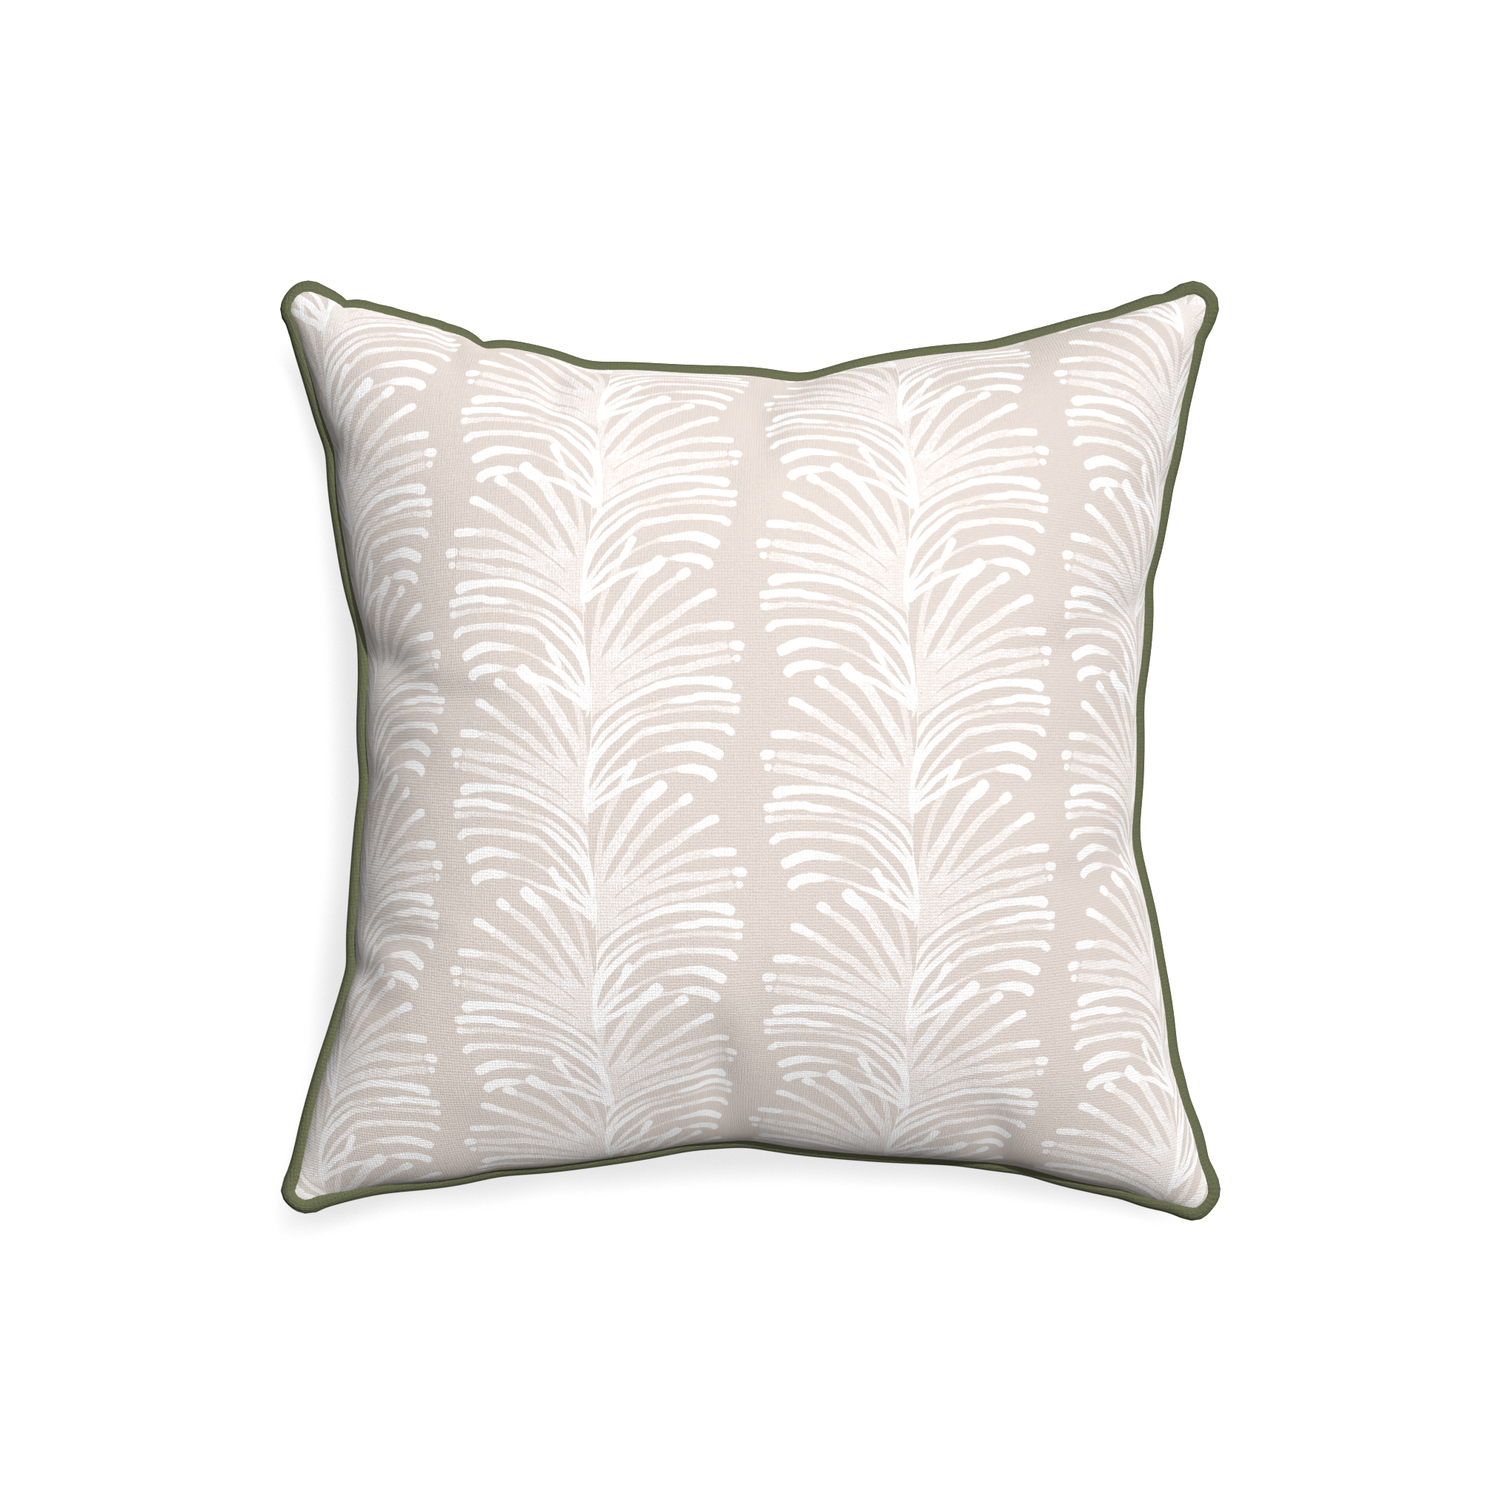 20-square emma sand custom pillow with f piping on white background